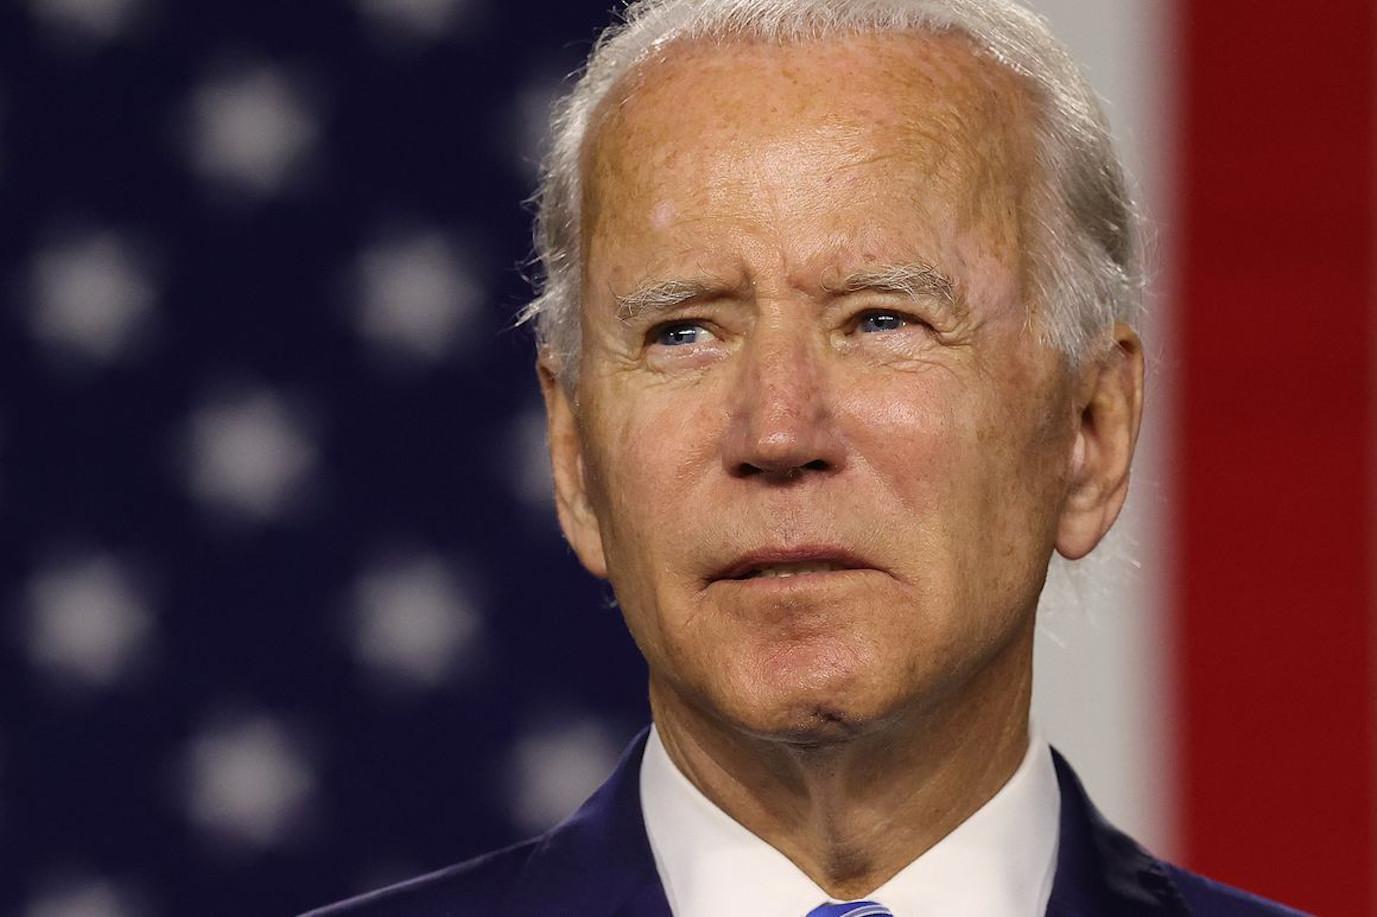 Biden Pledges to Review Increased Security Assistance to Azerbaijan